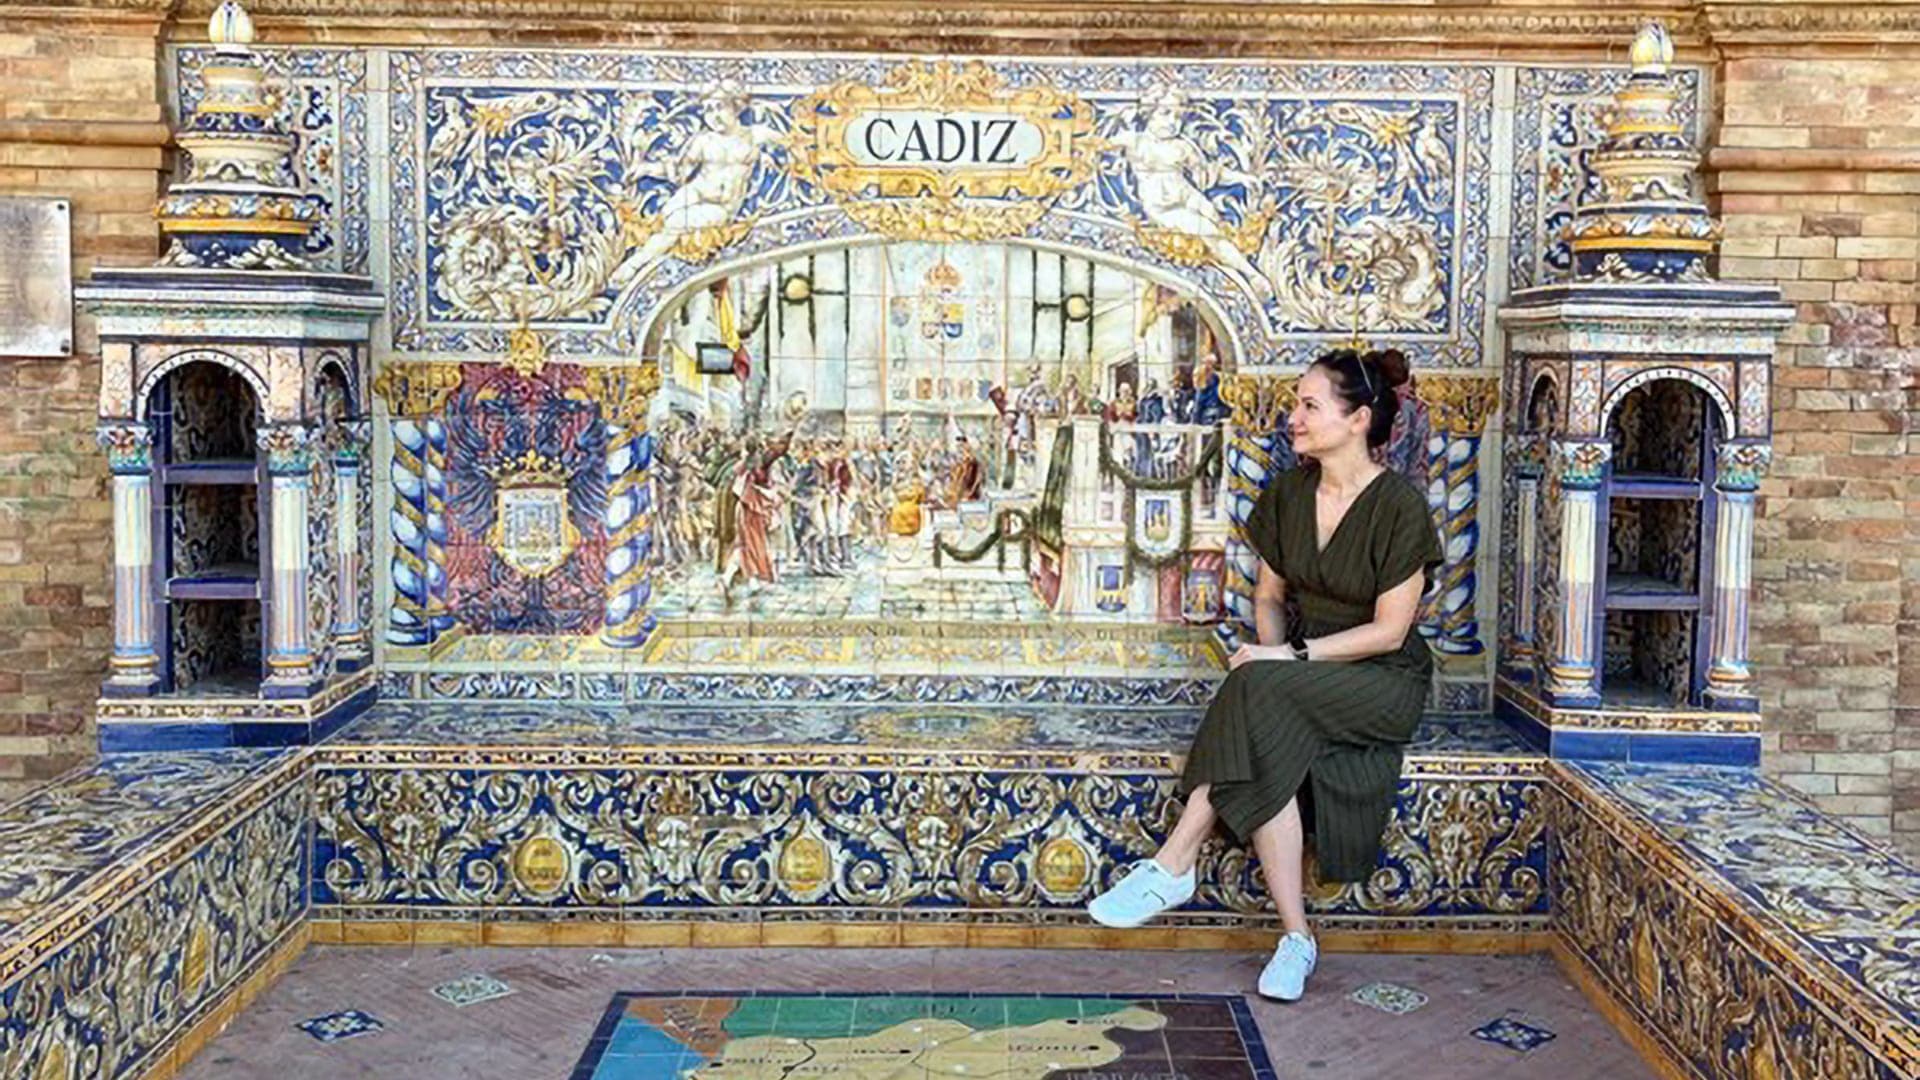 Loredana Gogoescu of Destguides seated in front of a vibrant tiled wall in Cadiz.